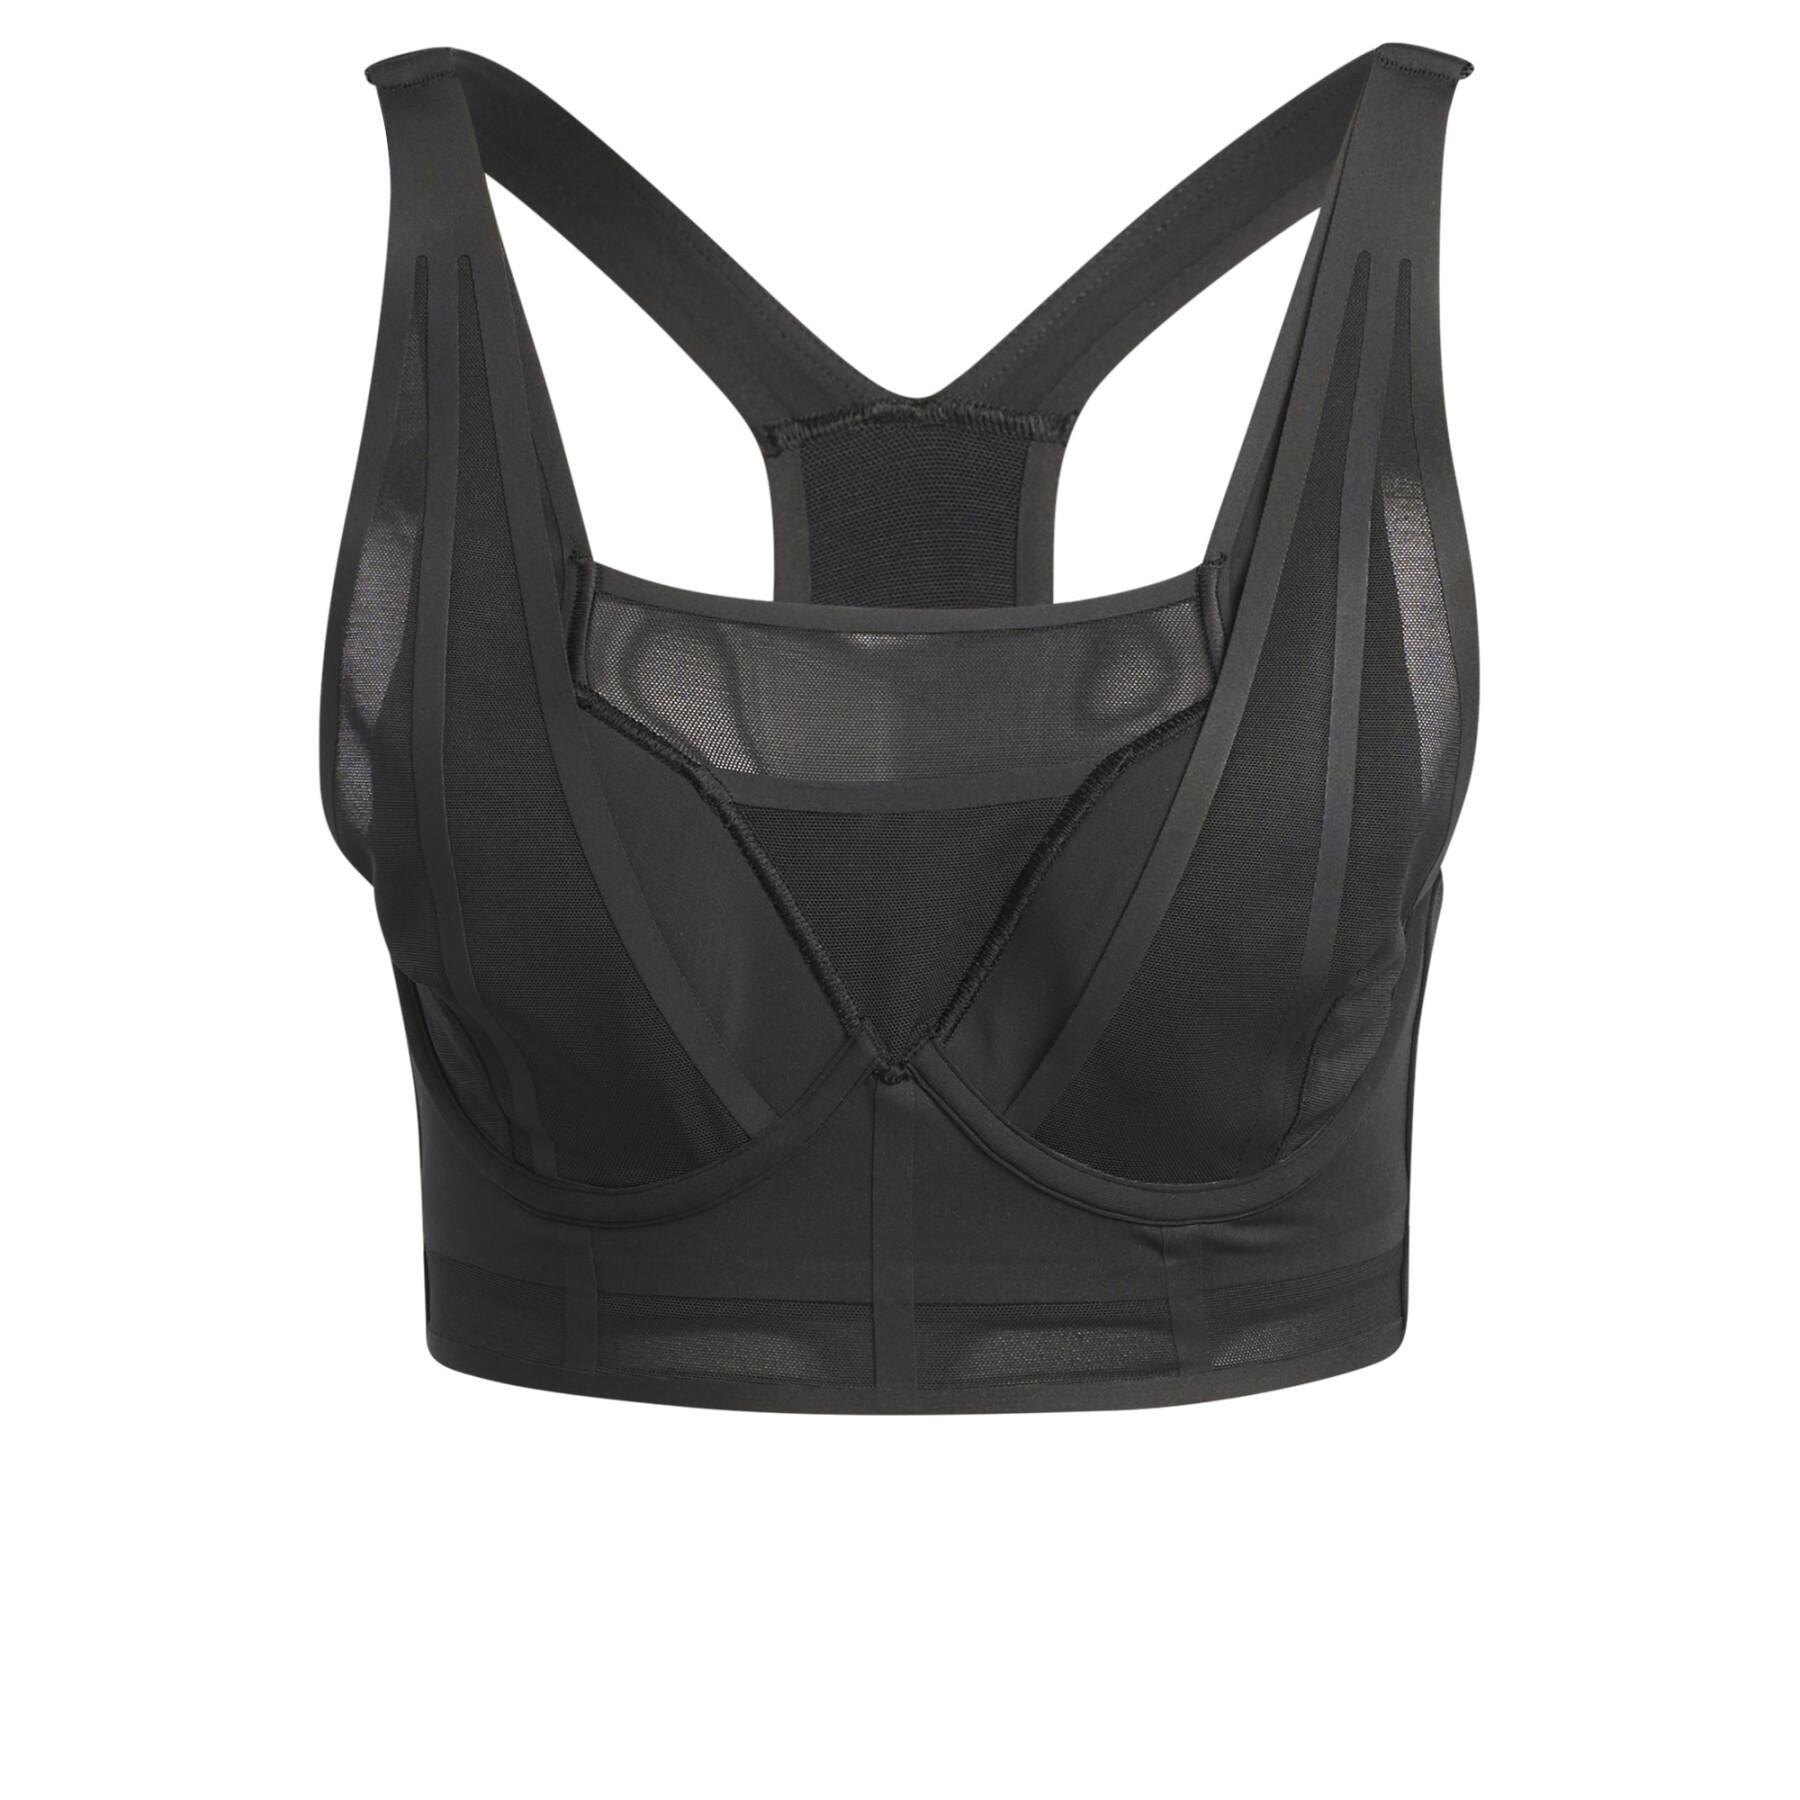 Custom-made high support bra for women adidas Impact Luxe